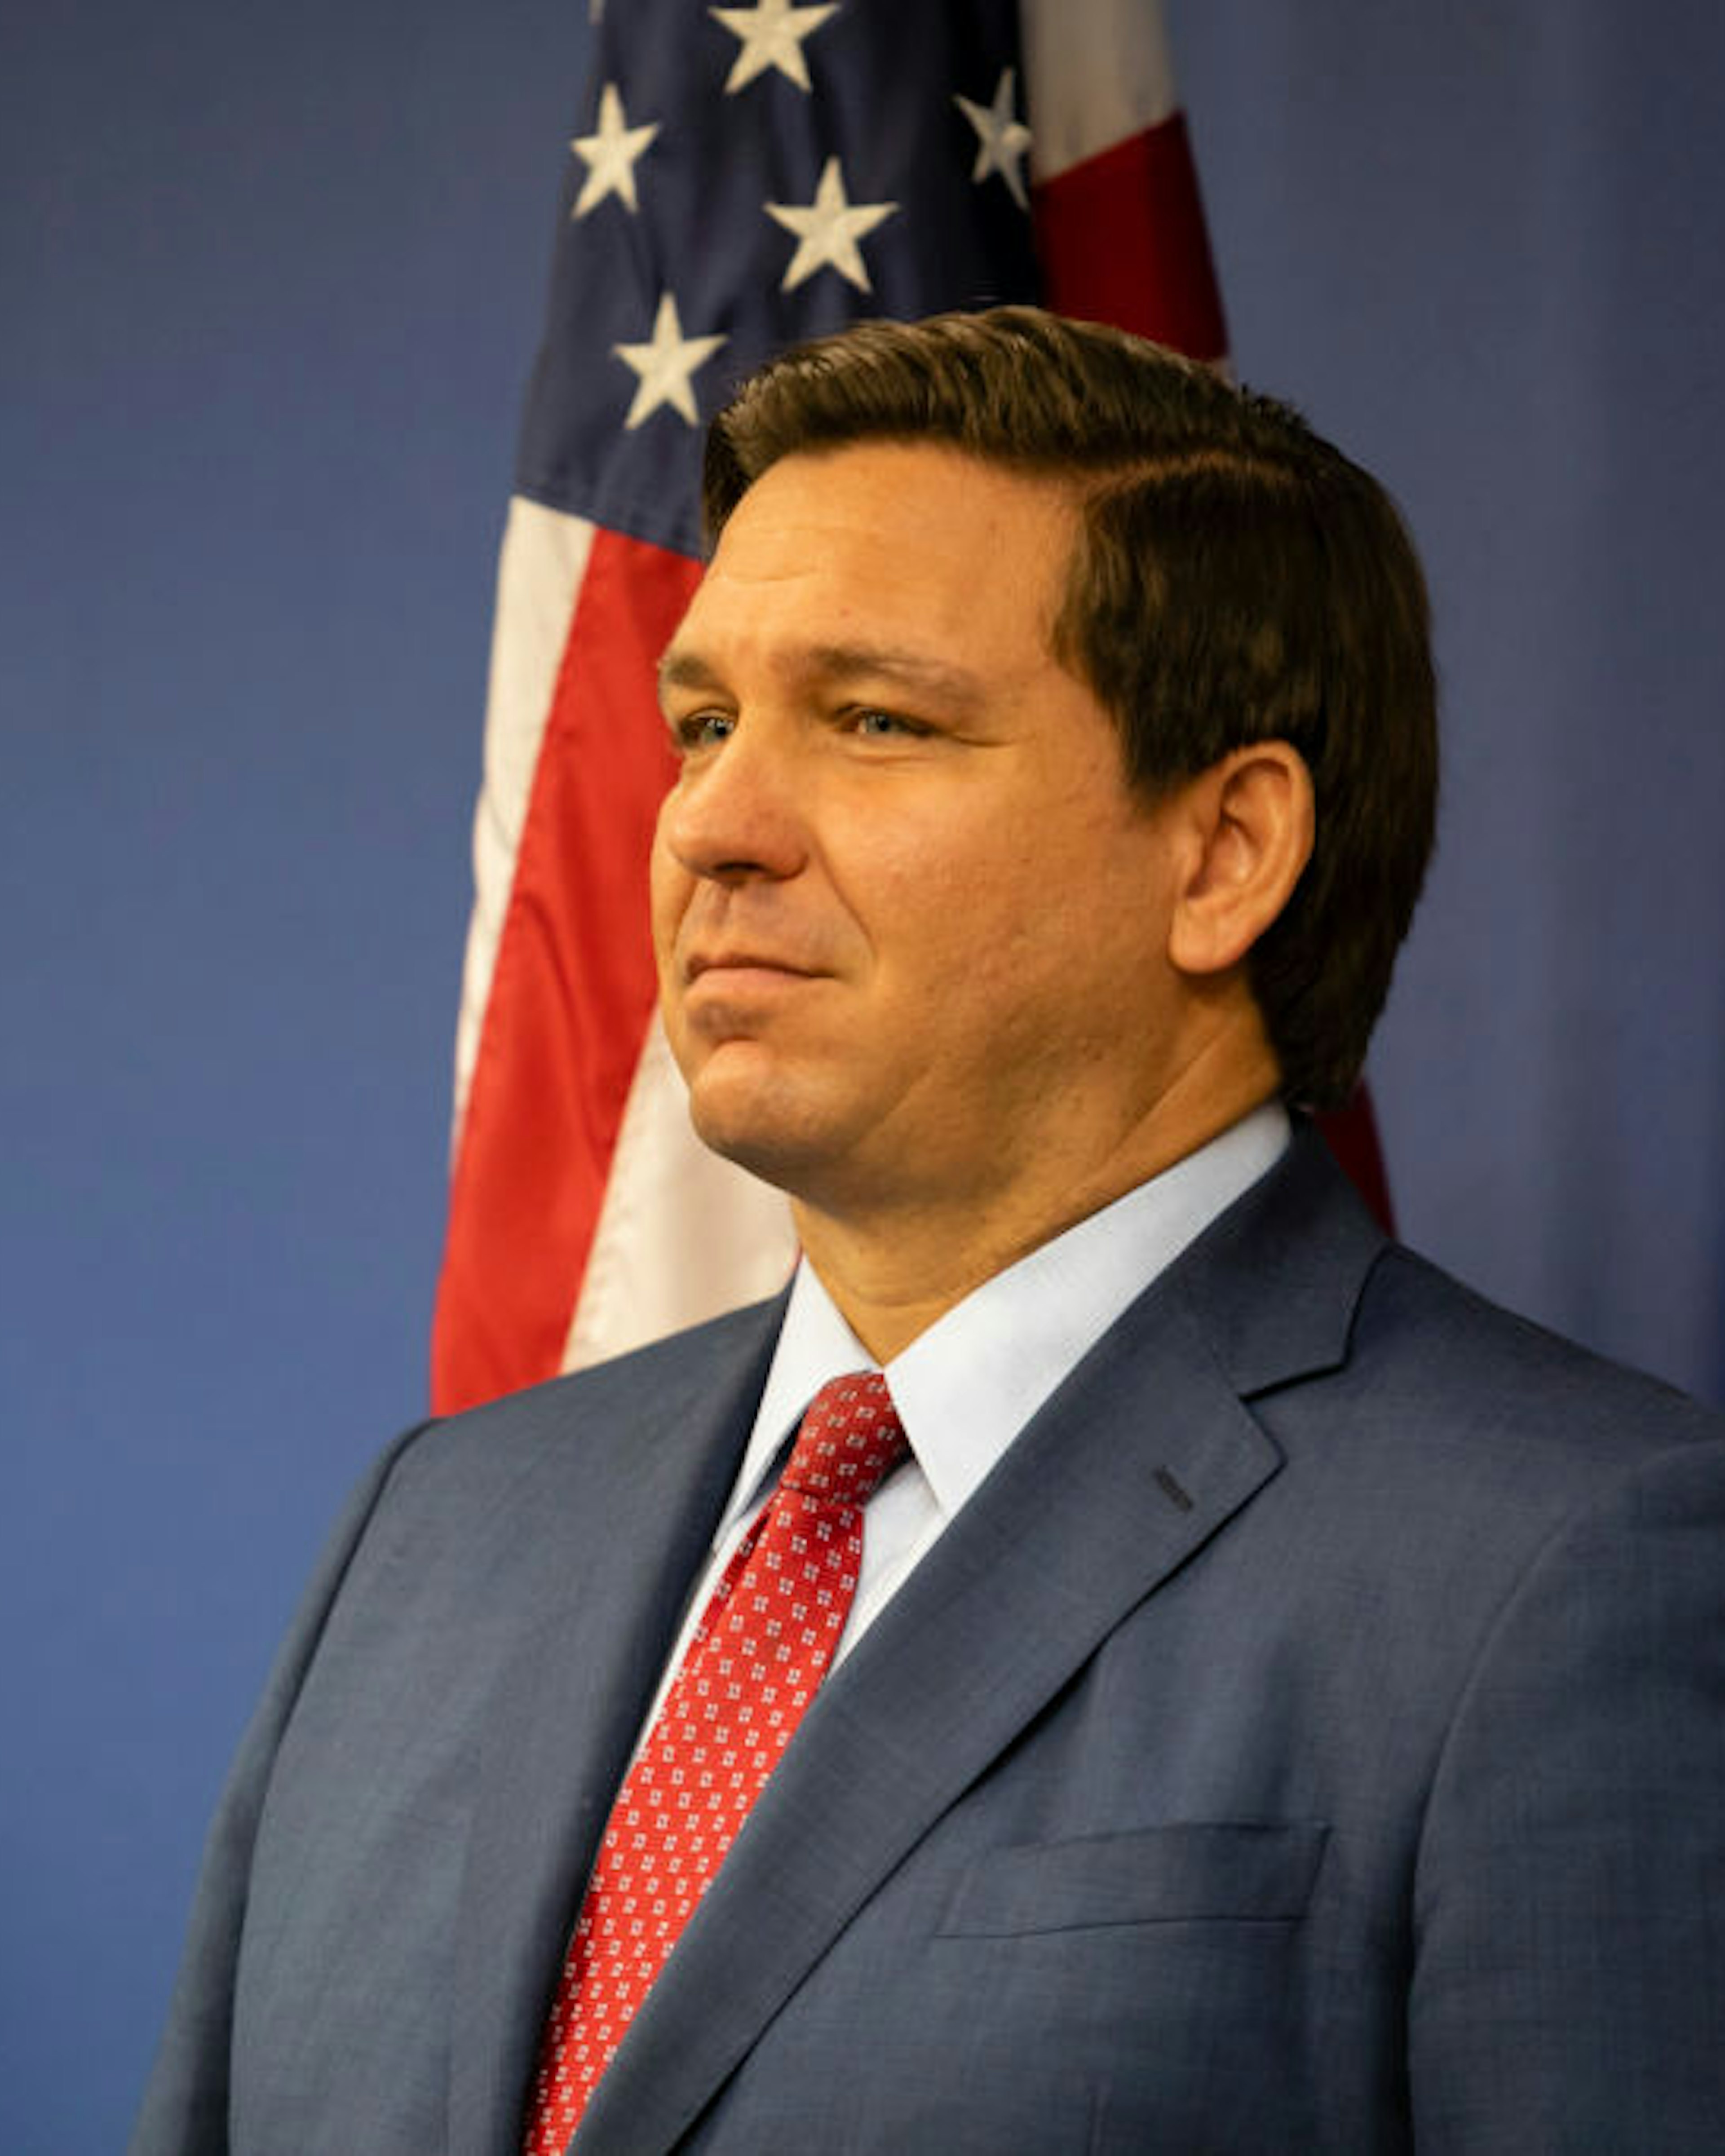 Florida Governor Ron DeSantis is seen during a press conference relating hurricane season updates at the Miami-Dade Emergency Operations Center on June 8, 2020 in Miami, Florida.